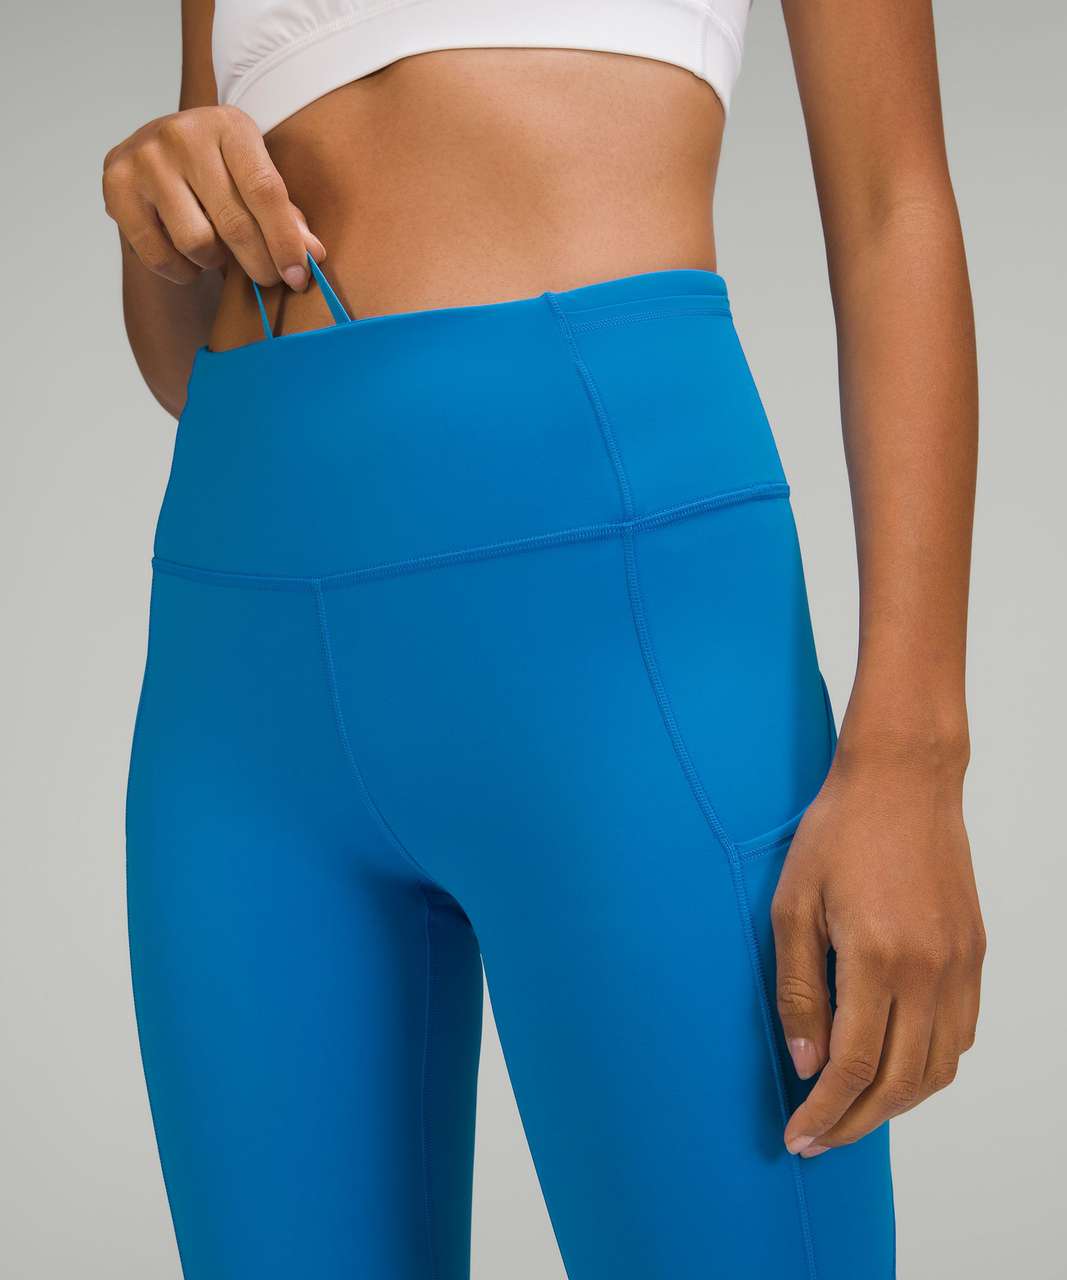 Lululemon Fast and Free High-Rise Tight 25" - Poolside